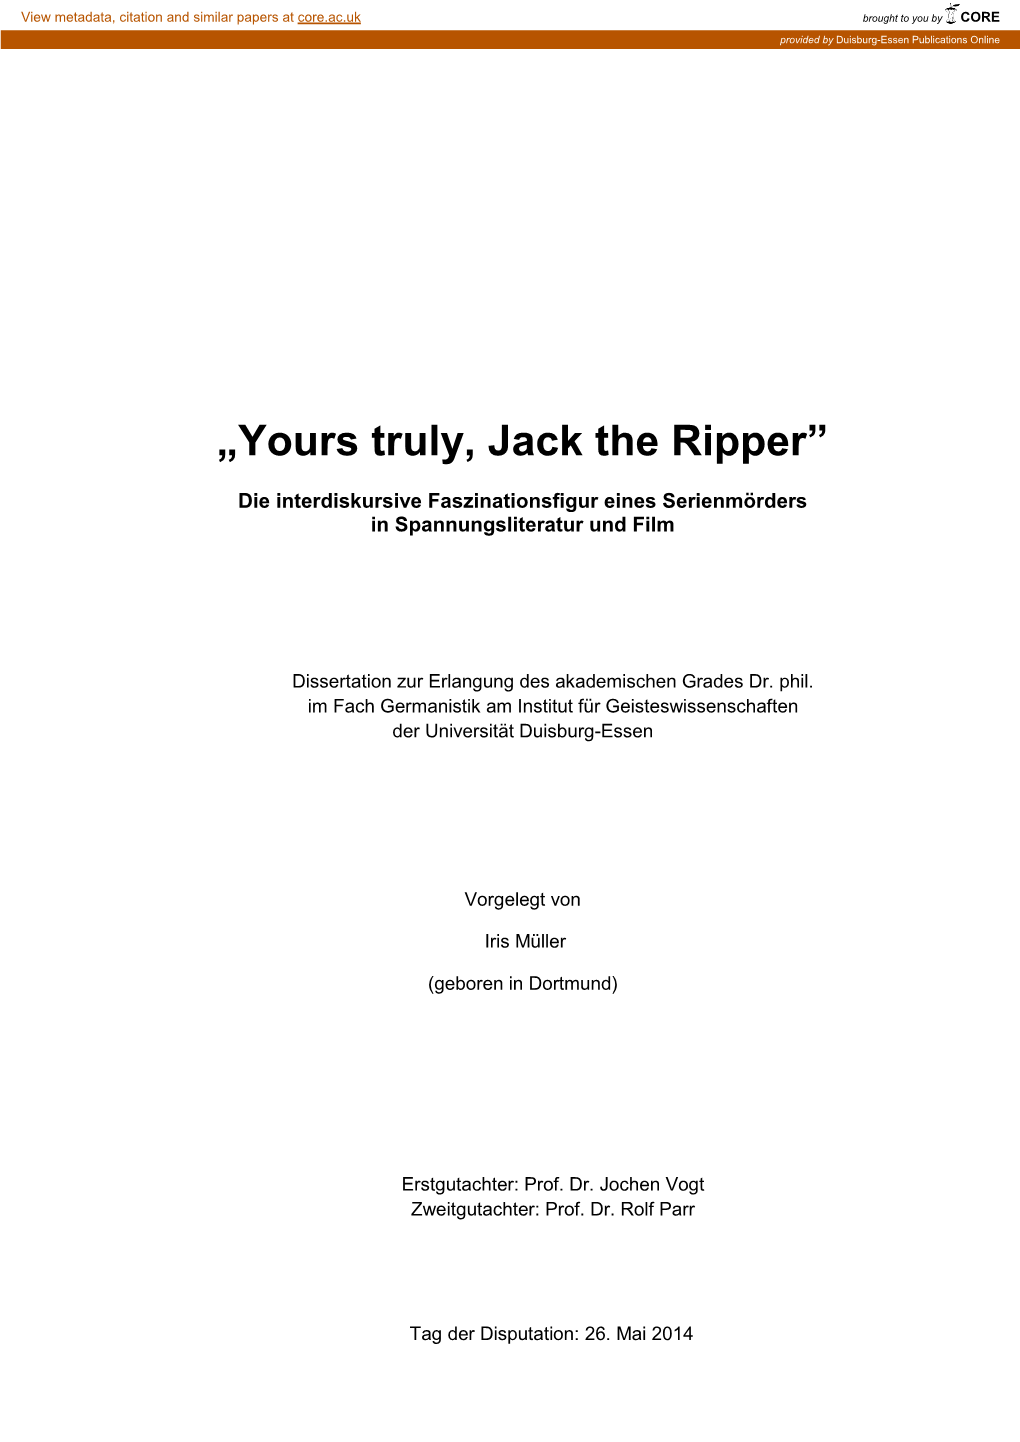 „Yours Truly, Jack the Ripper”